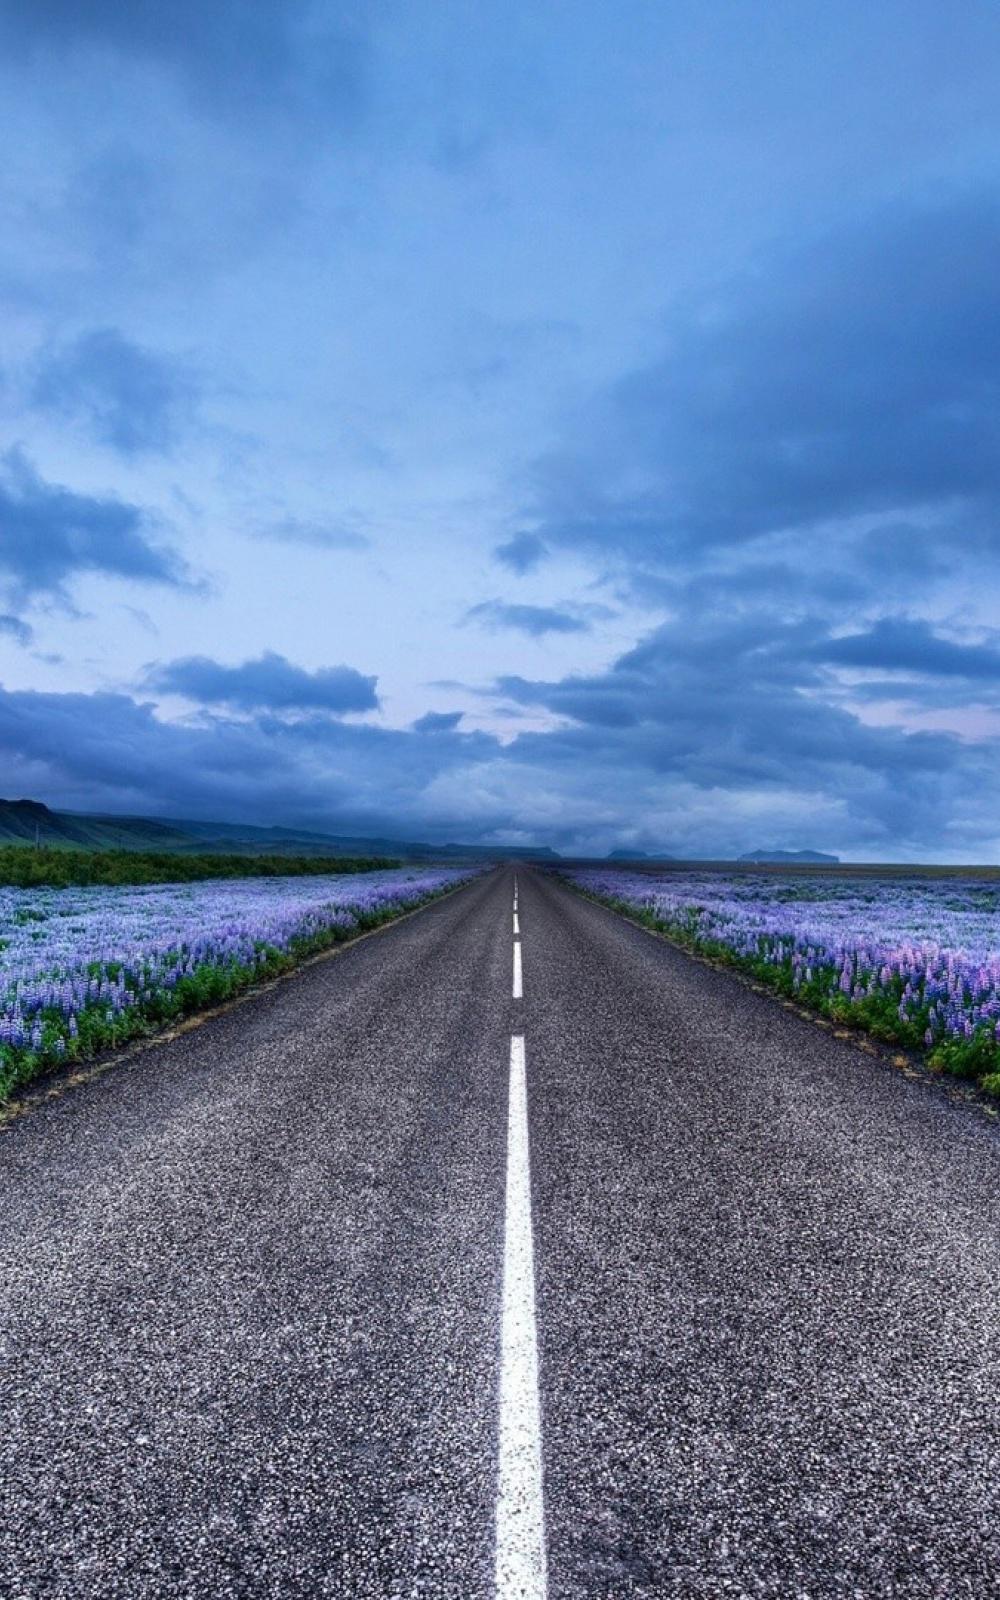 Blue Flower Field Highway Android Wallpaper free download